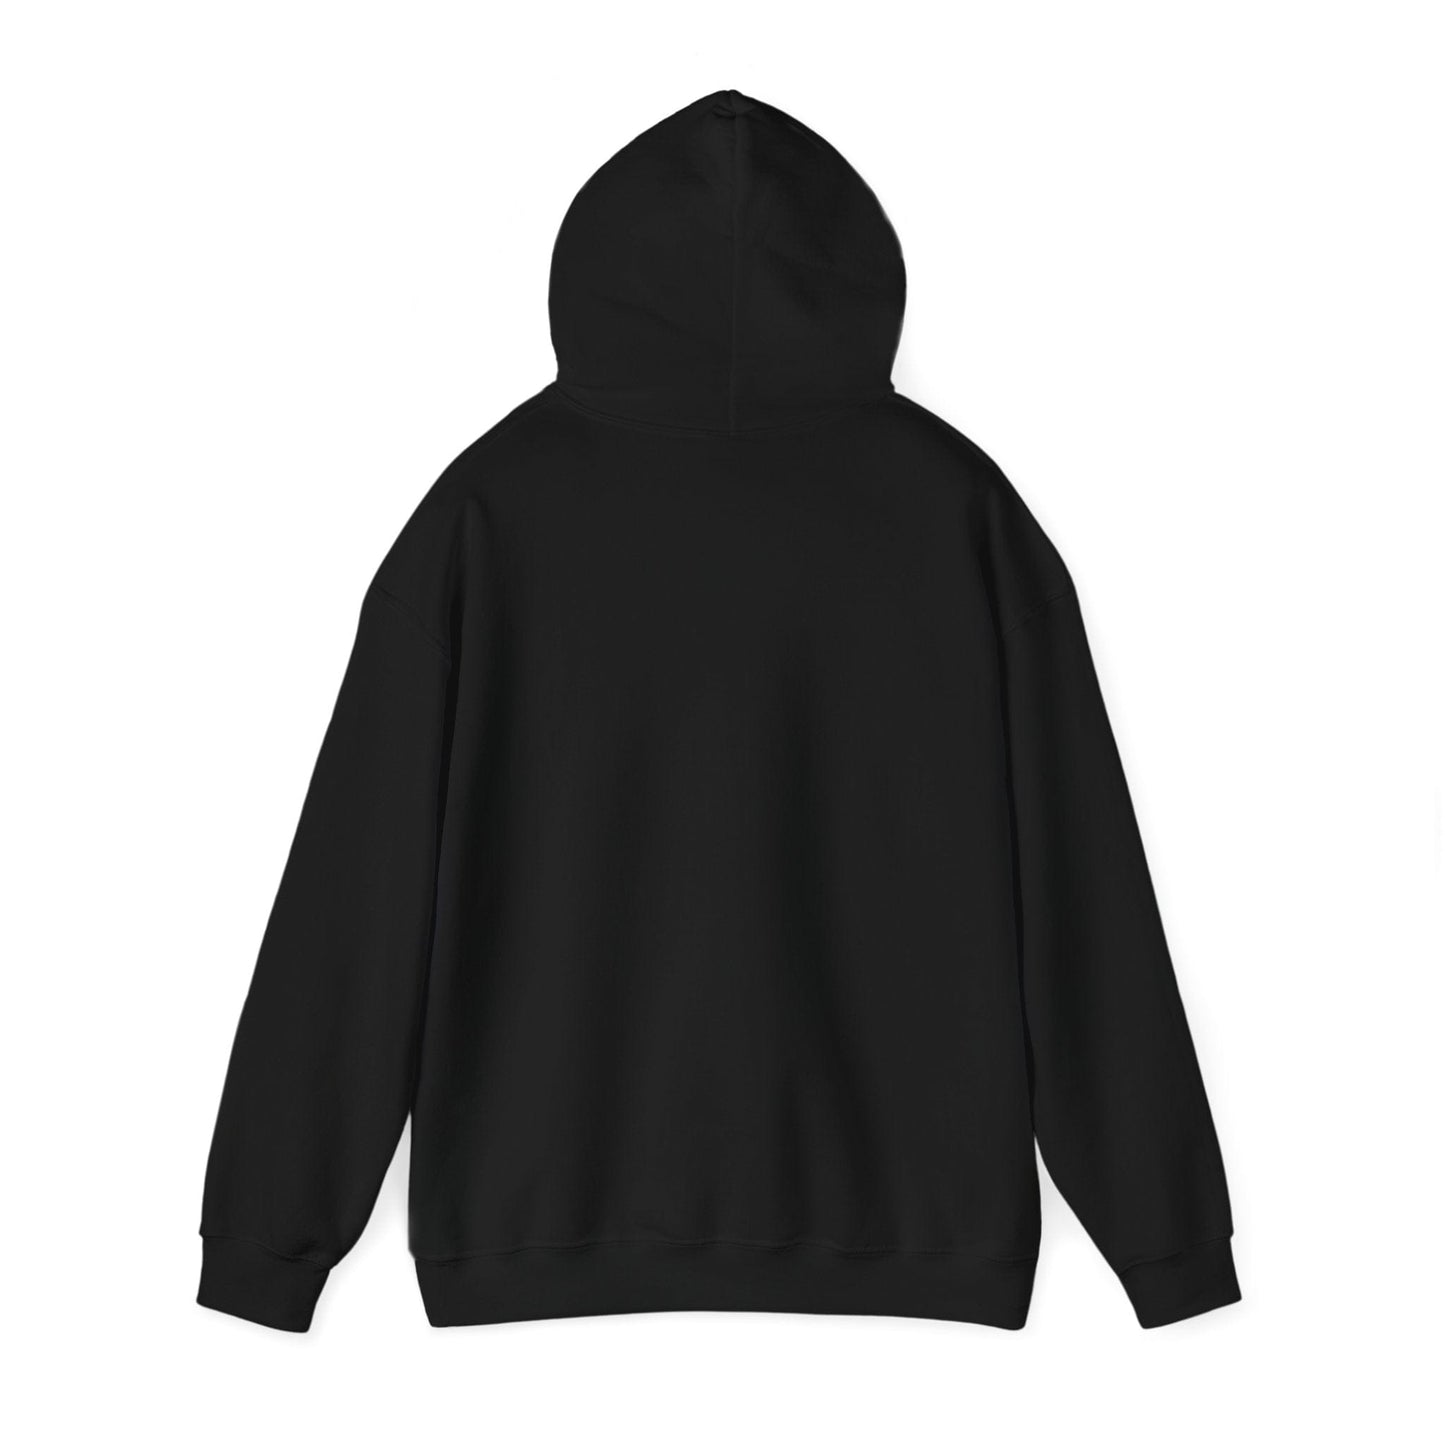 Raw Is law hoodie